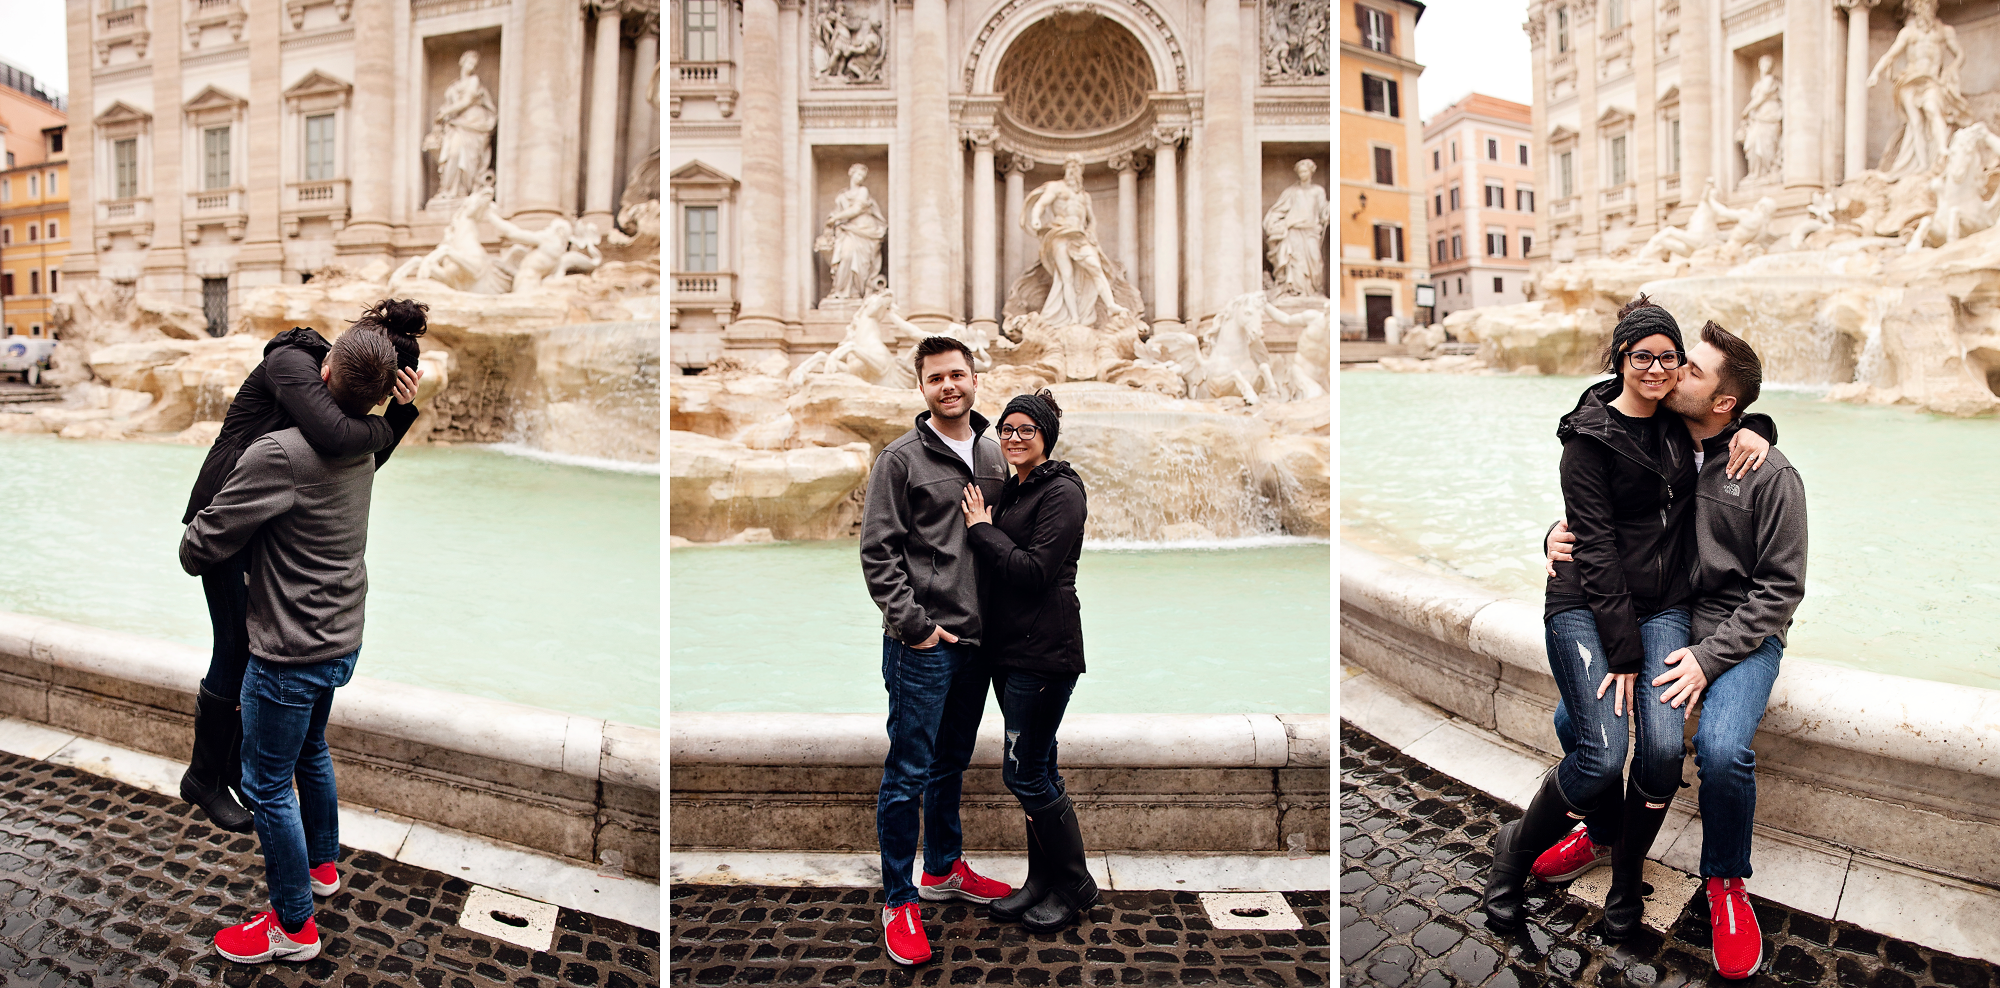 Honeymoon, vacation, family, engagement, maternity, wedding, love story individual and solo photoshoots in Rome, Italy by photographer Tricia Anne Photography | Rome Photographer, vacation, tripadvisor, instagram, fun, married, bride, groom, love, story, photography, session, photoshoot, wedding photographer, mywed, vacation photographer, engagement photo, honeymoon photoshoot, rome honeymoon, rome wedding, elopement in Rome, honeymoon photographer rome, Family Photo shoot Rome, Rome Engagement Photography, Rome Engagement Photographer, family Photo shoot, Rome Photography, surprise proposal rome, What to do in Rome, Trevi Fountain, Trevi Fountain Surprise Proposal